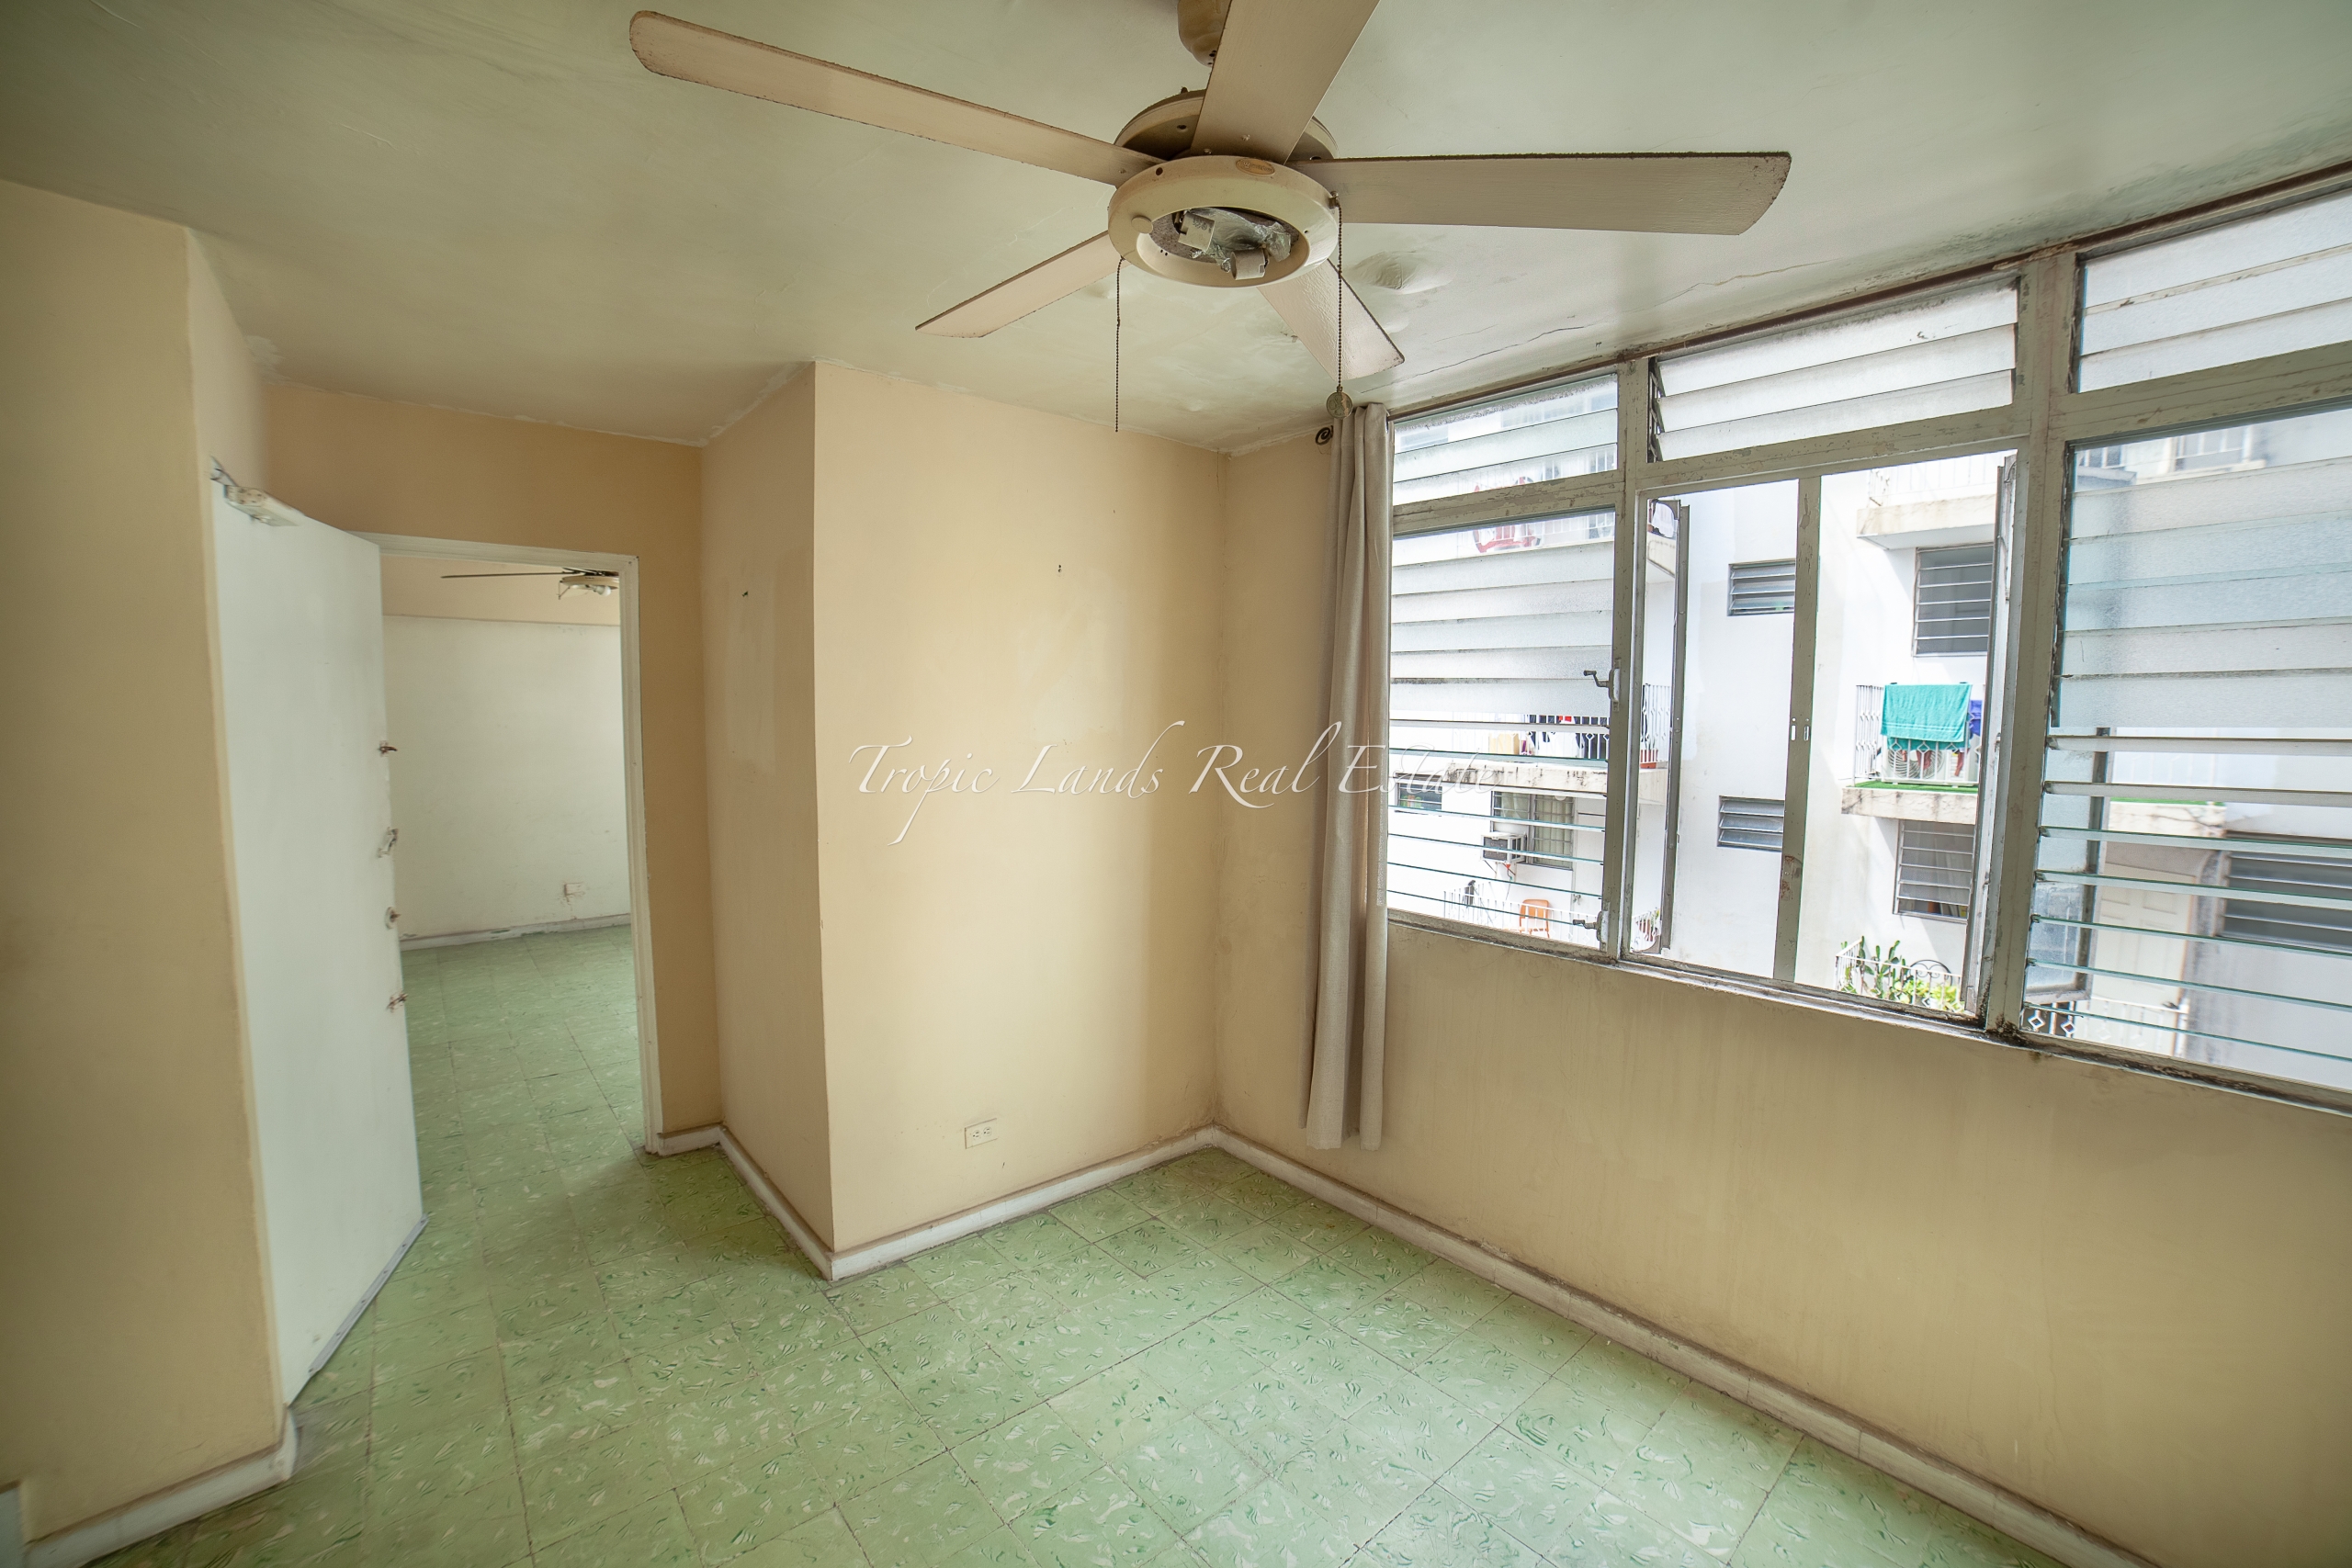 commercial & residential property for sale in casco viejo panama edificio comercial apartment building investment property